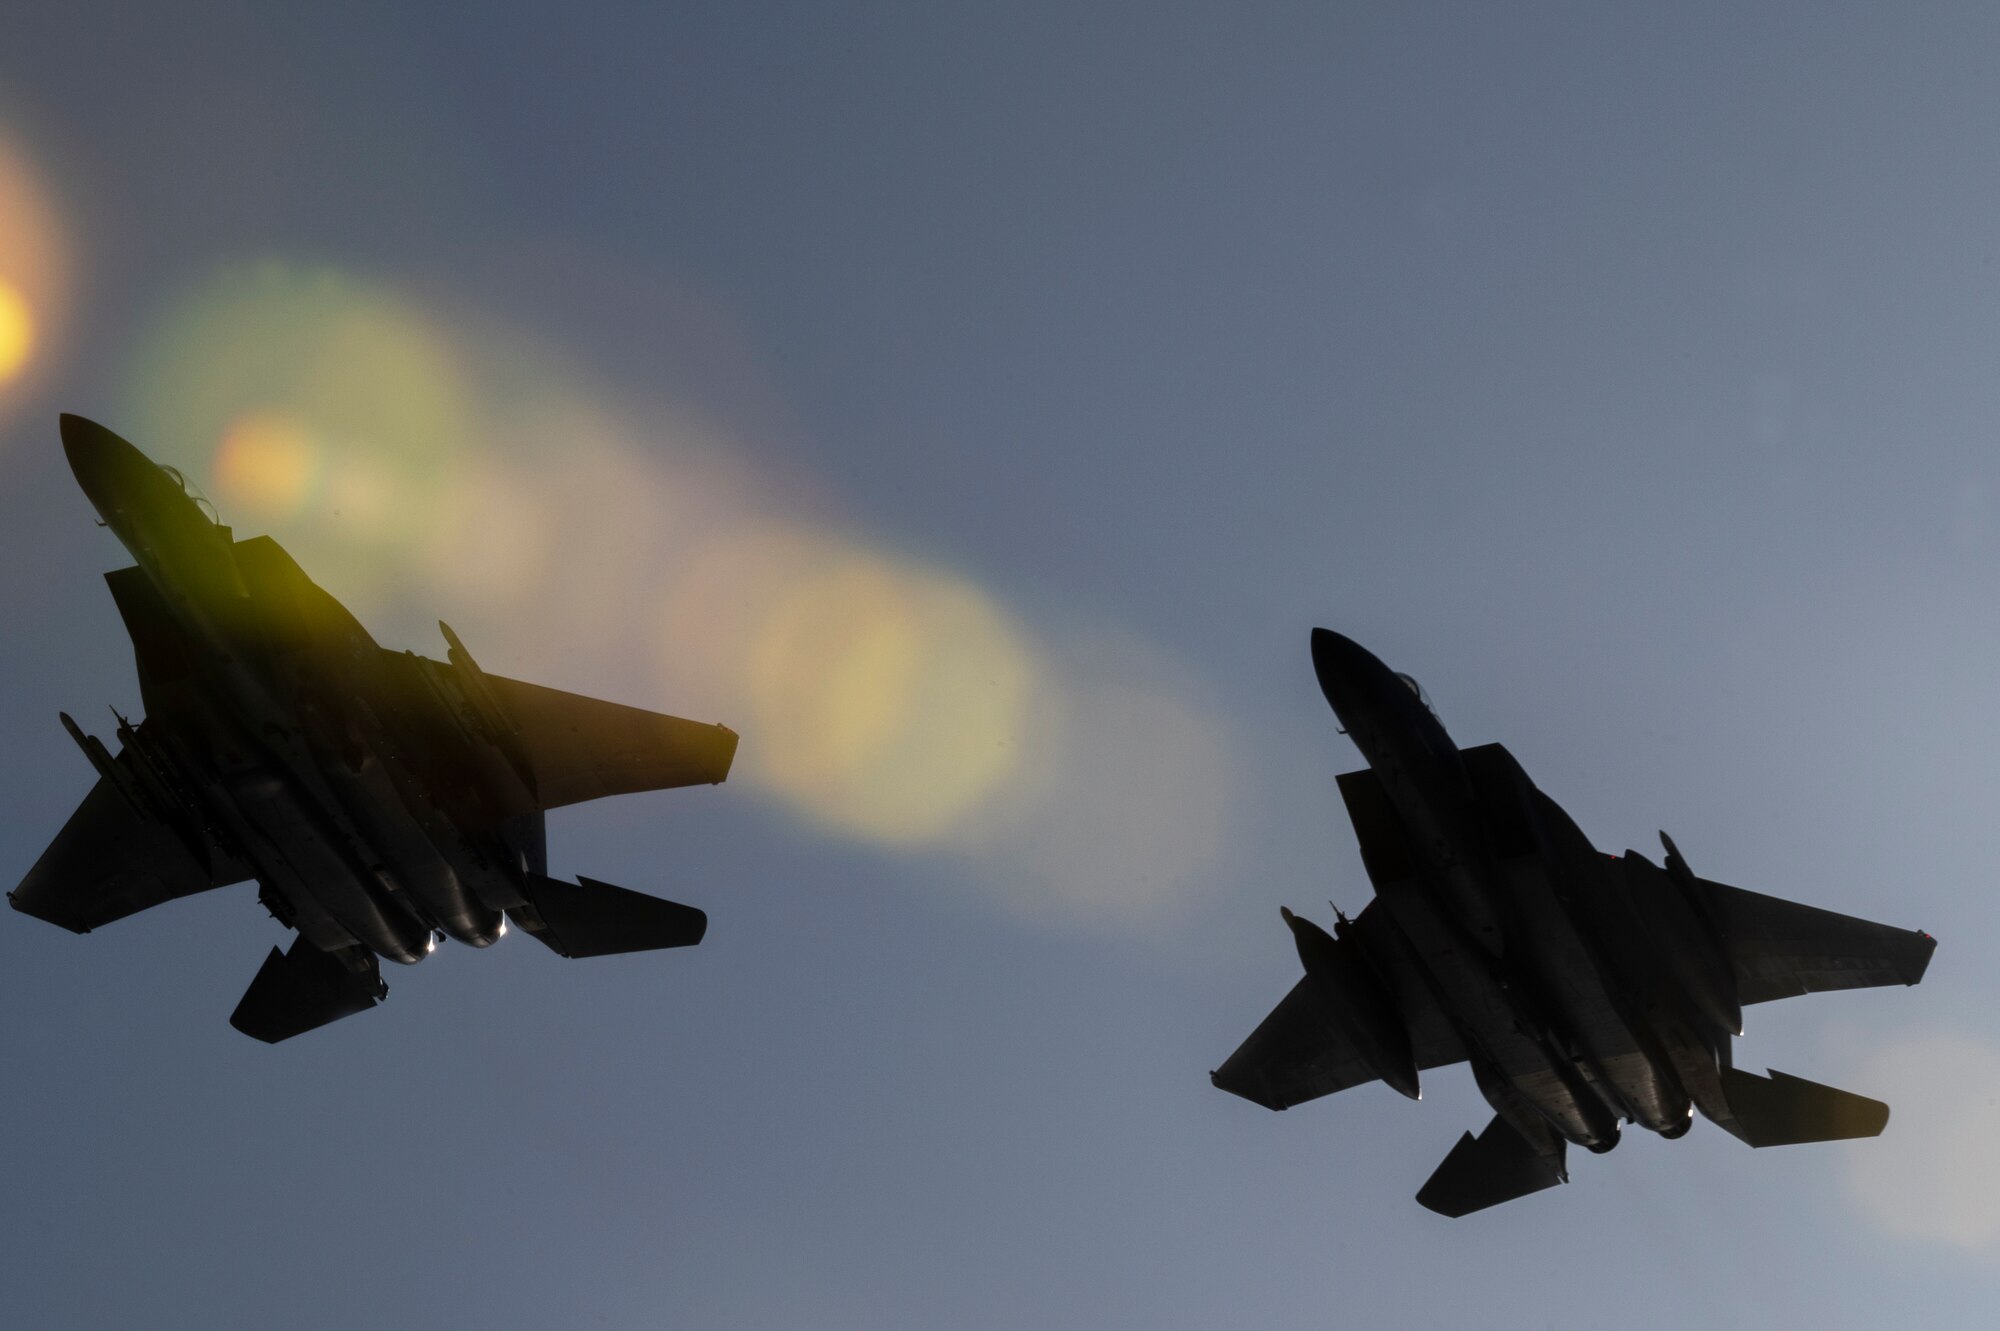 Two F-15E Strike Eagles, assigned to 85th Test and Evaluation Squadron, Eglin AFB, Fla., fly over  during The Doolittle Raiders’ 80th Anniversary ceremony, April 18, 2022 at Okaloosa Island. More than 14 aircraft including the B-25 medium bombers, which participated in the Doolittle Raid, conducted an aerial review over Okaloosa Island, Florida following a formal ceremony honoring participants of the air operation.